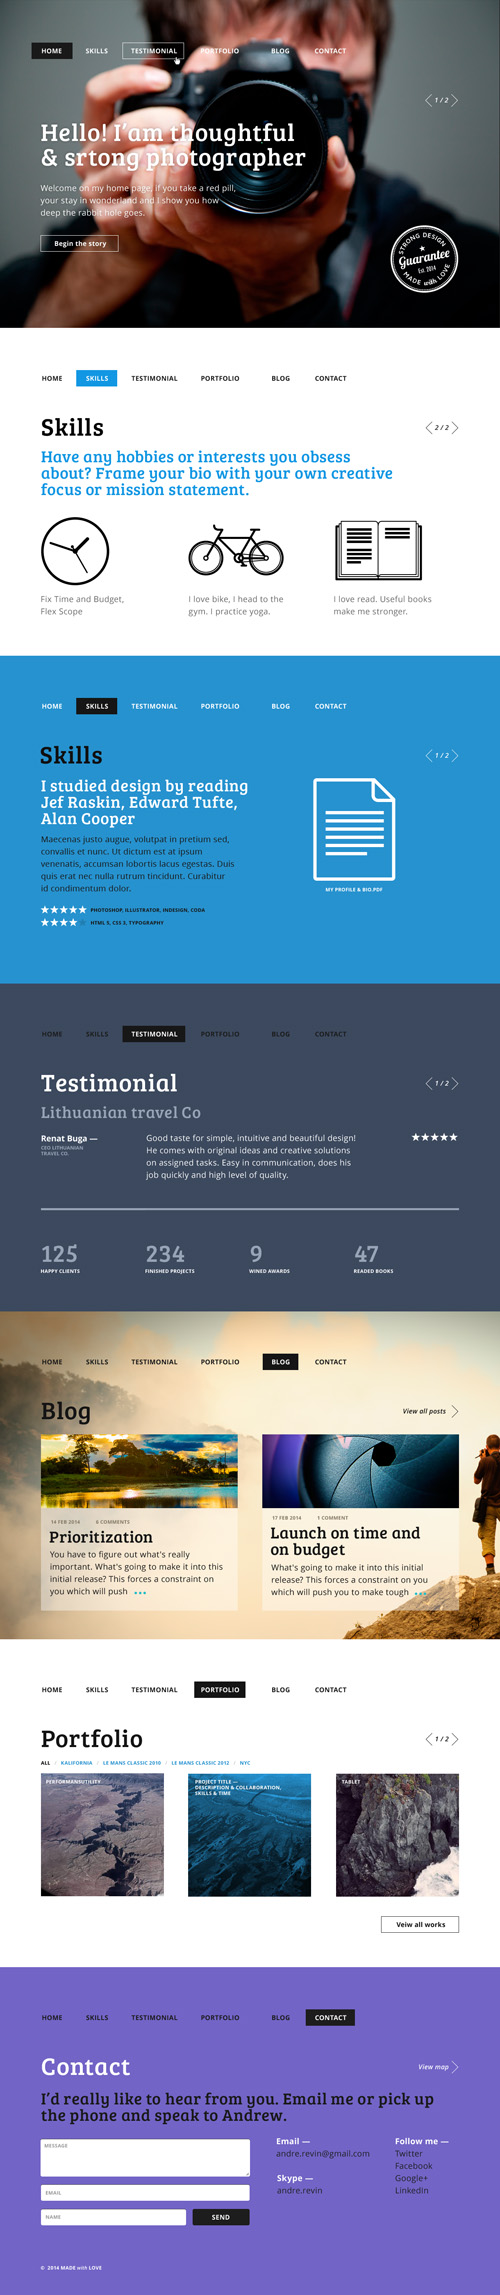 Redman - One Page PSD Template